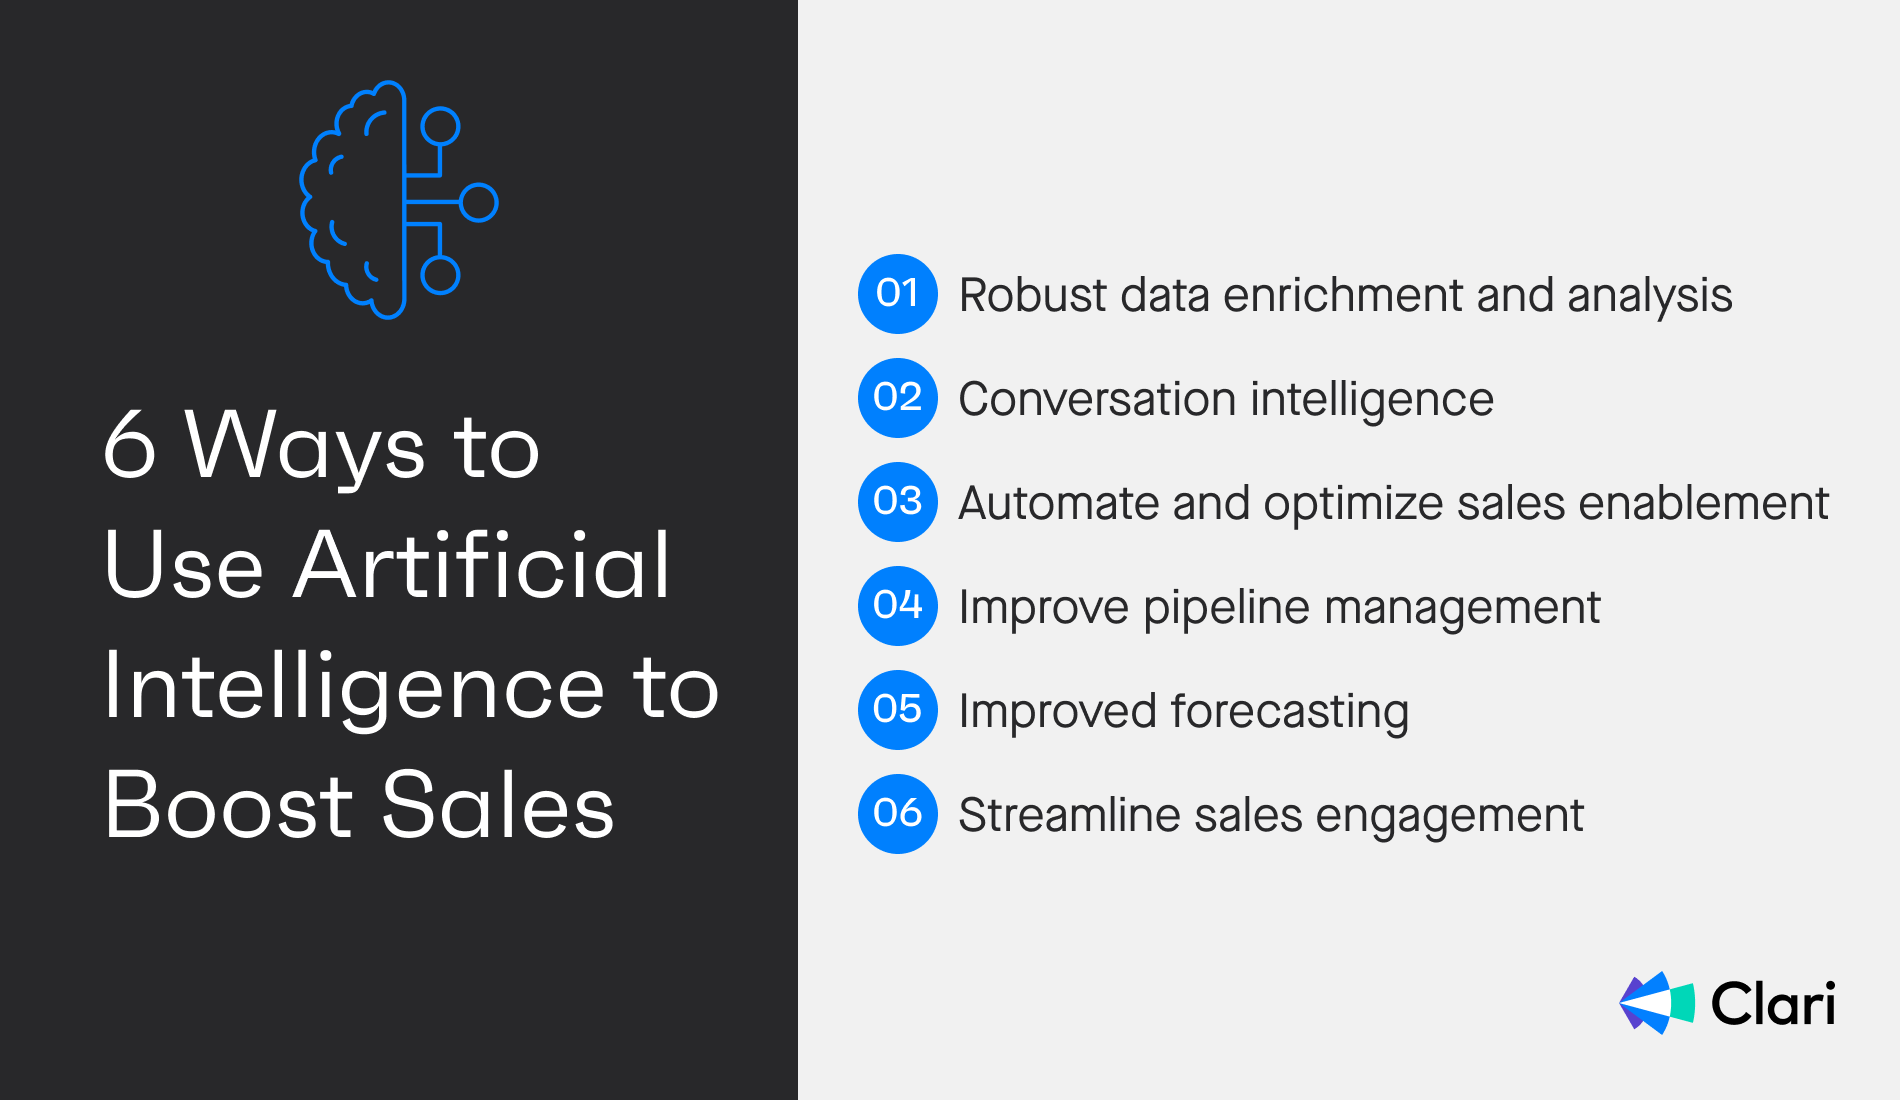 6 Ways to use artificial intelligence to boost sales.